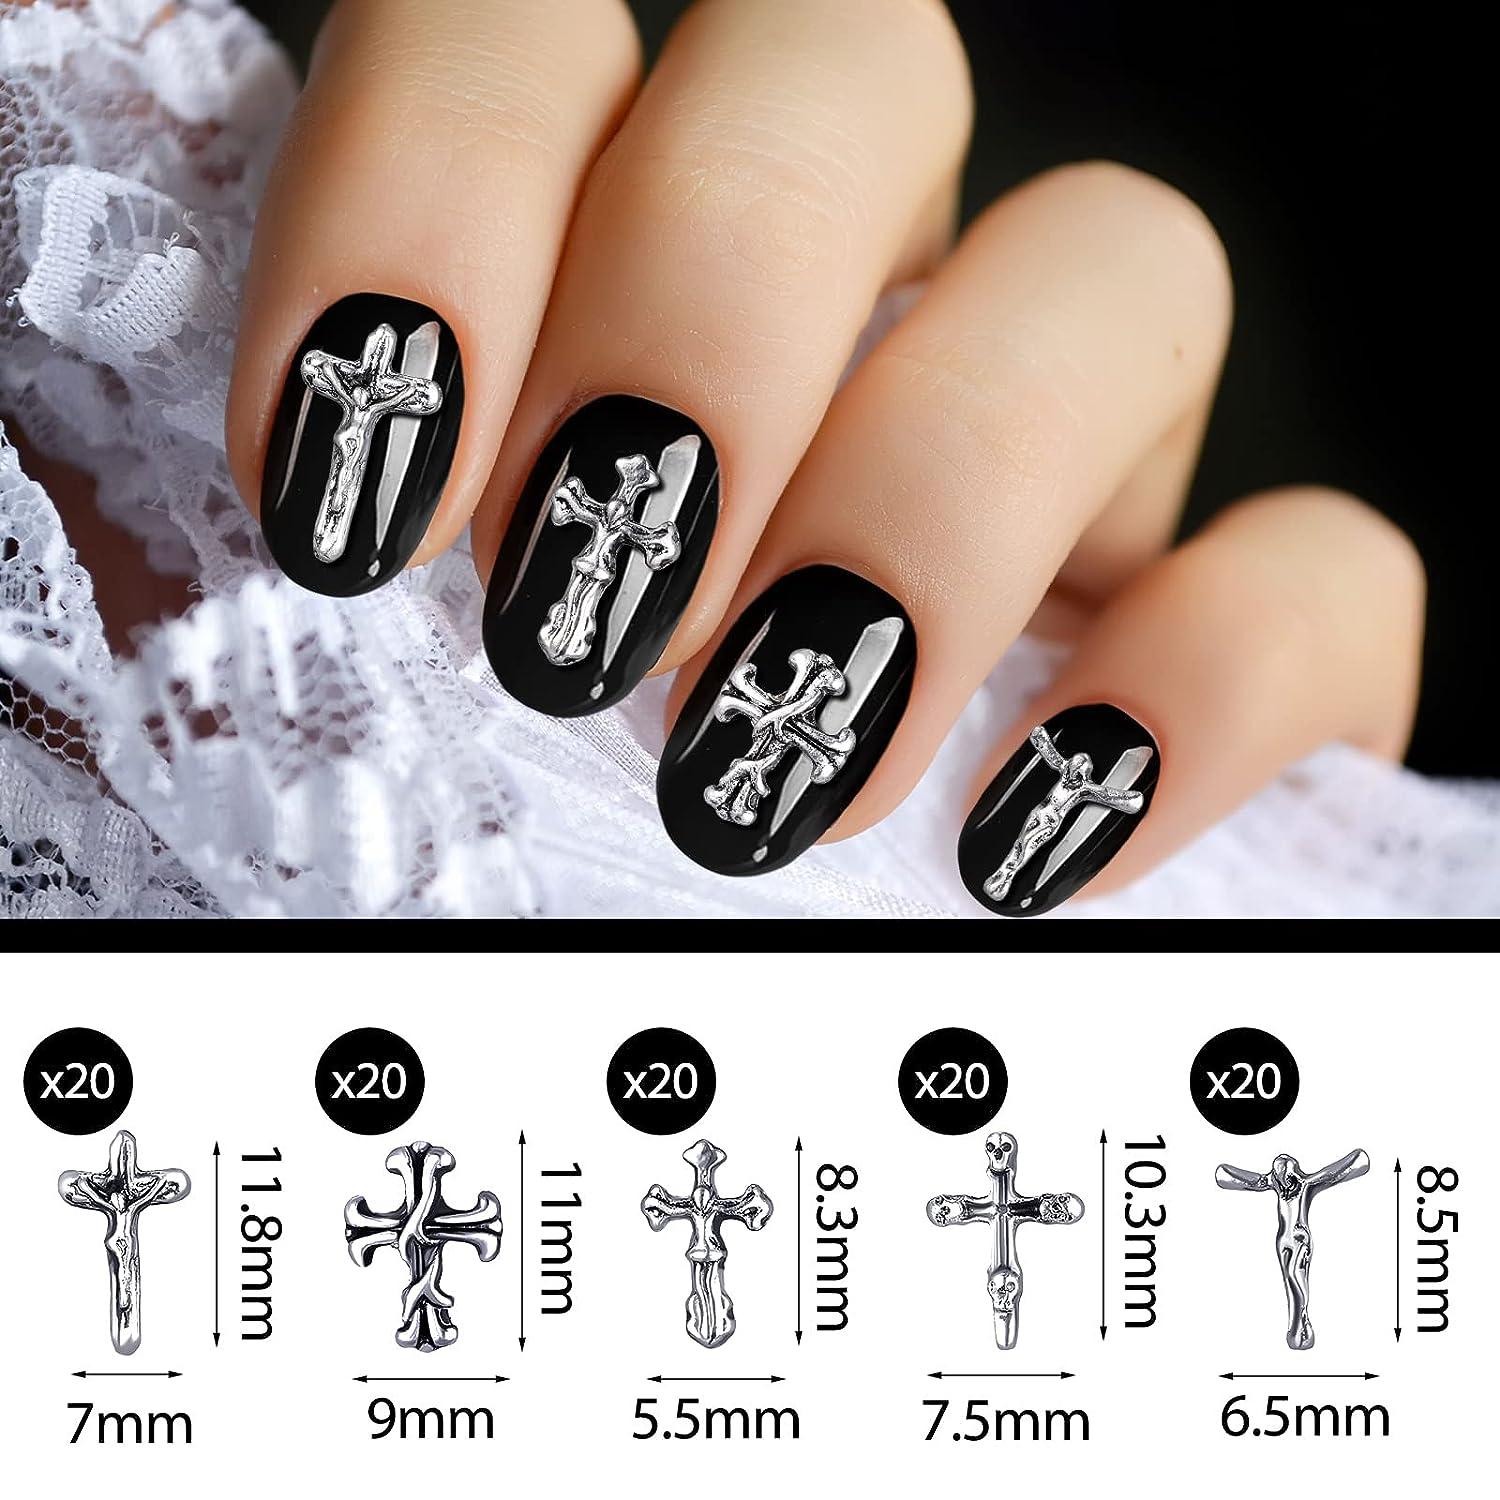 100pcs Punk Charms for Nails Gothic Nail Art Charms Alloy